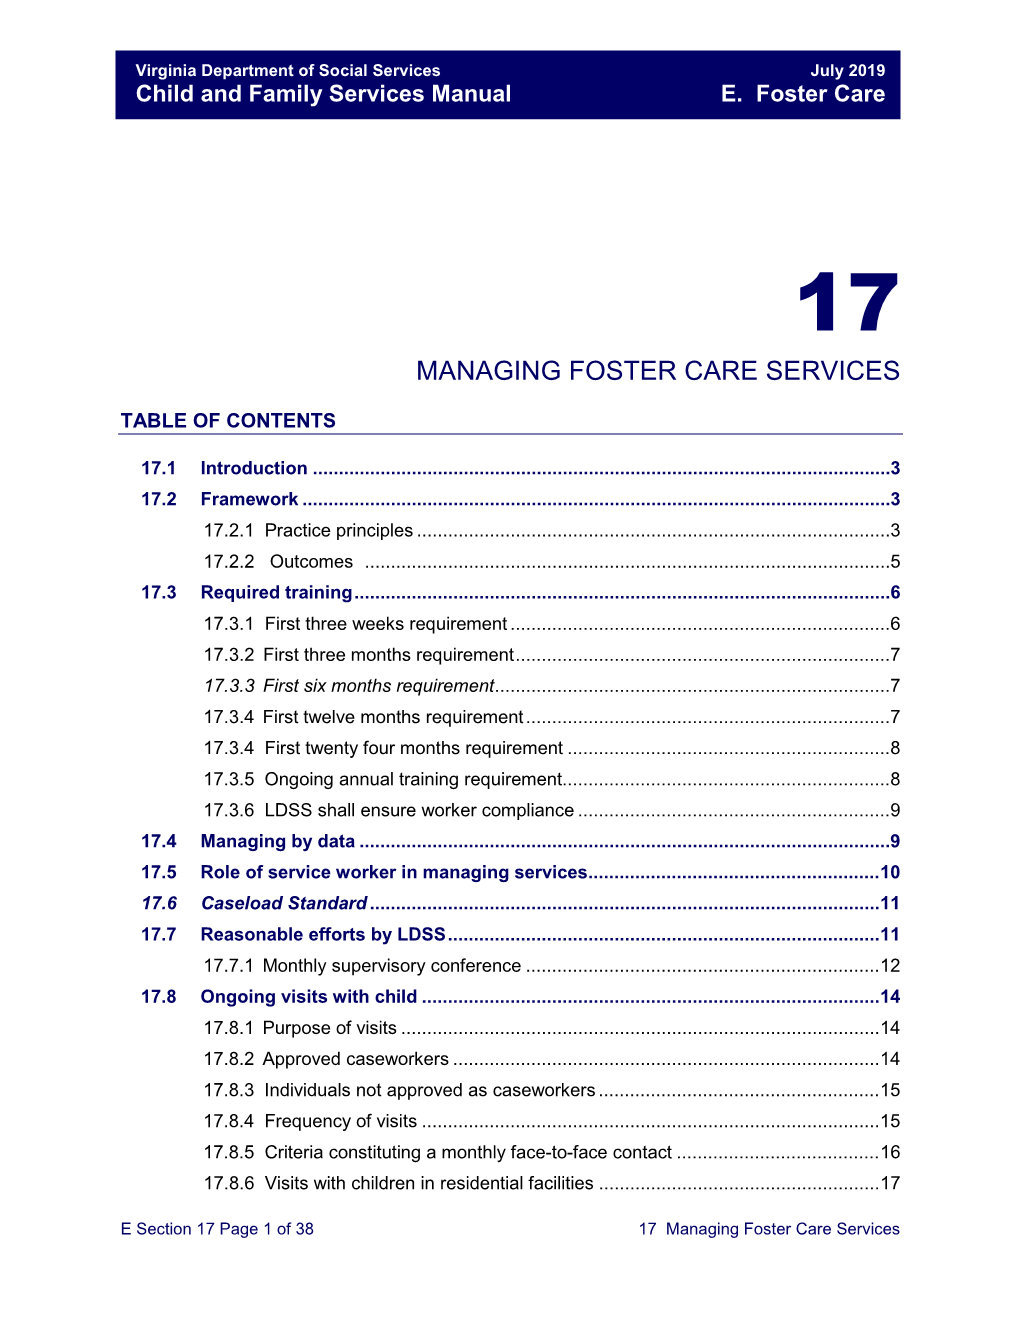 Section 17 Managing Foster Care Services